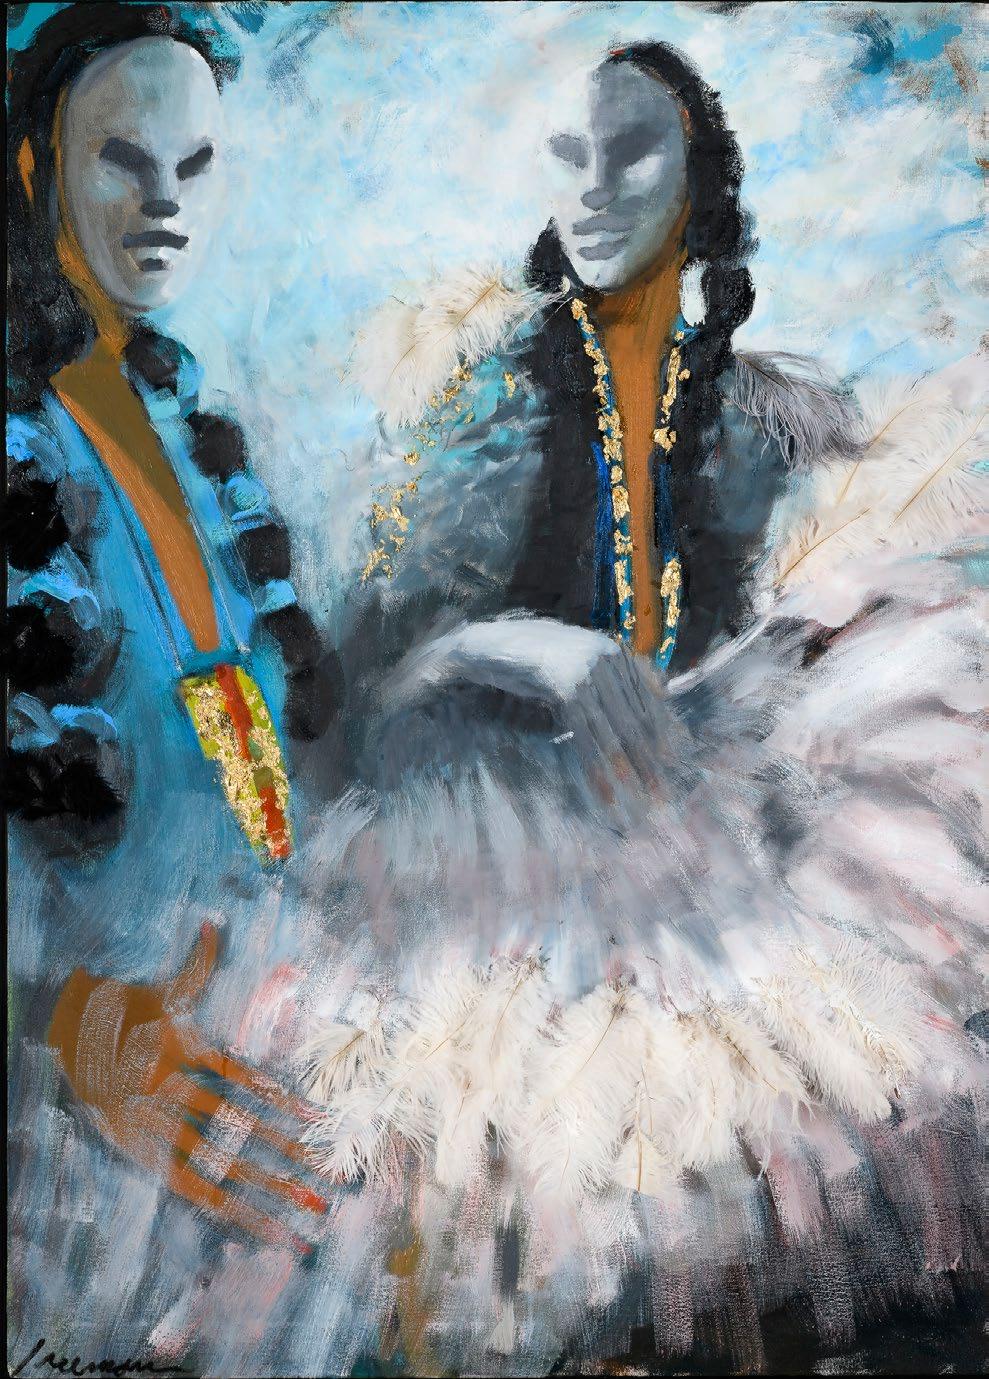 new approach to his painting by adding ostrich feathers as well as gold leaf to represent the elaborate suits worn by the Mardi Gras Indians.